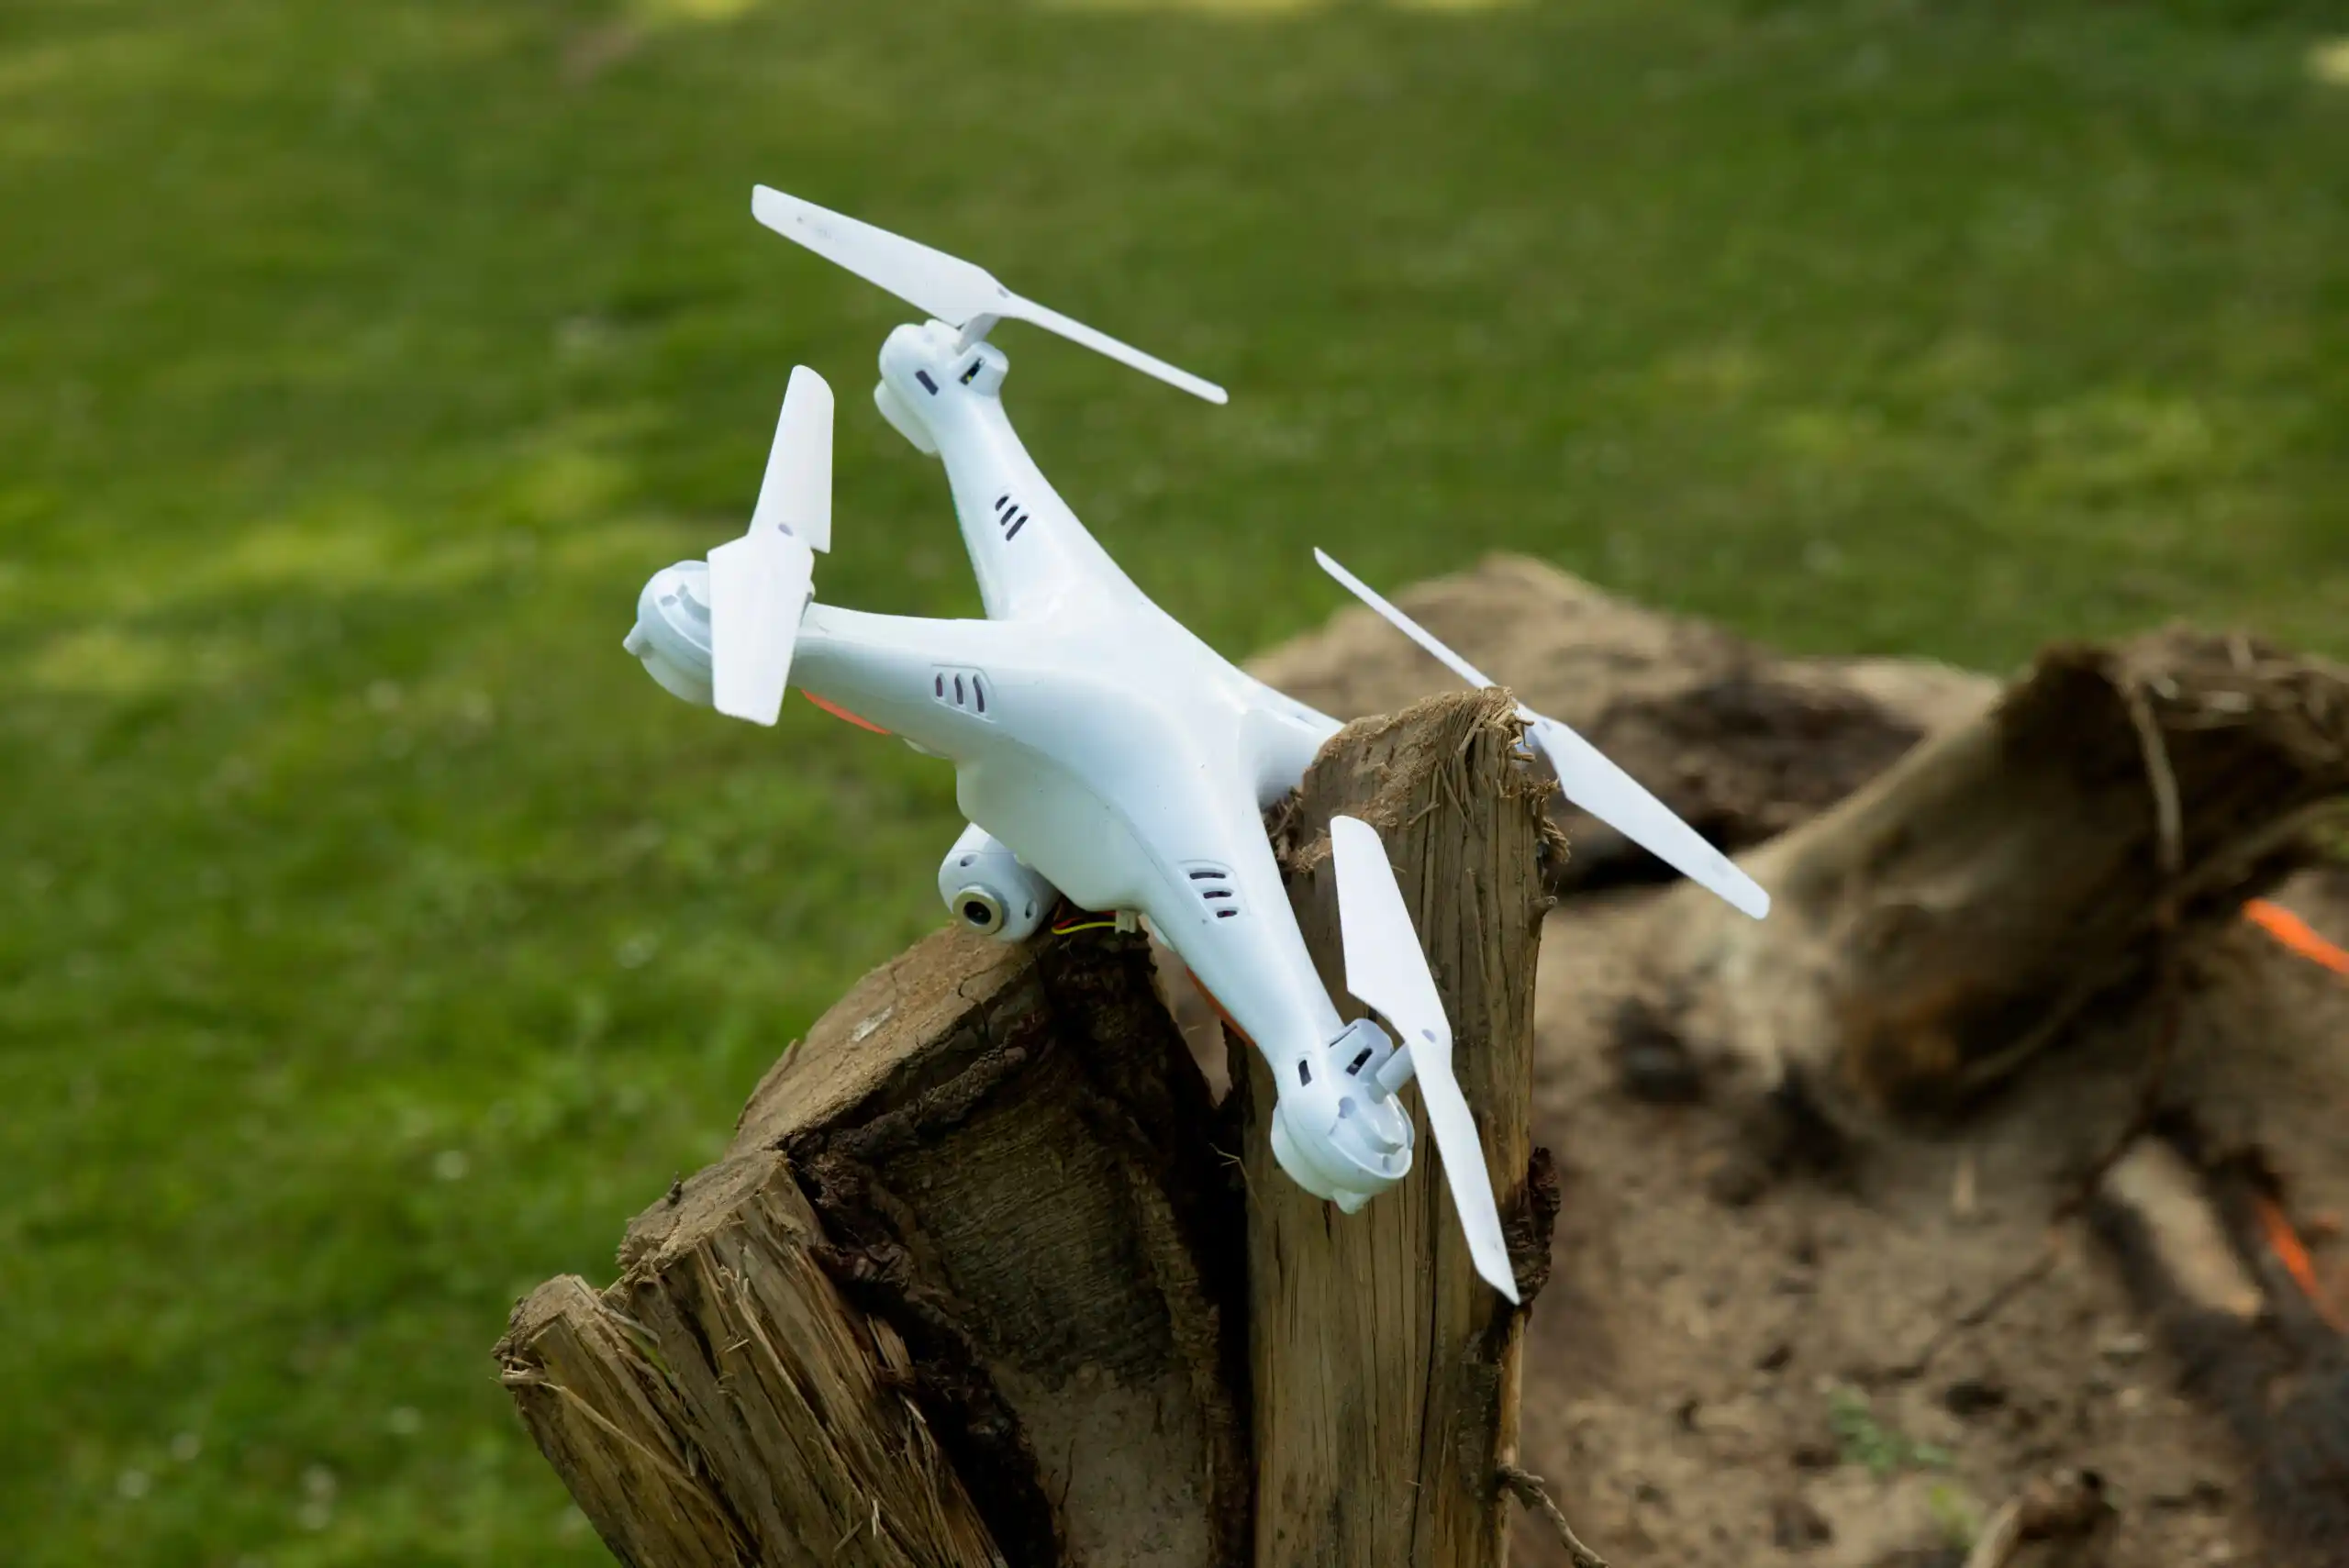 Drone Insurance: How Much Is It and Is It Worth It?